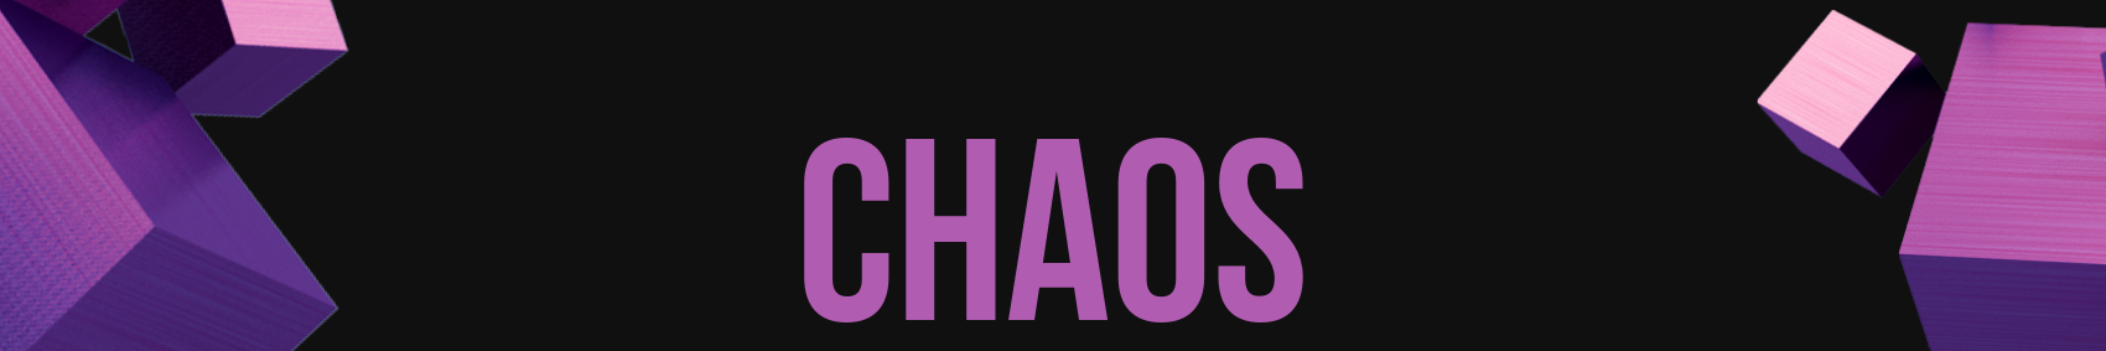 Chaos_official